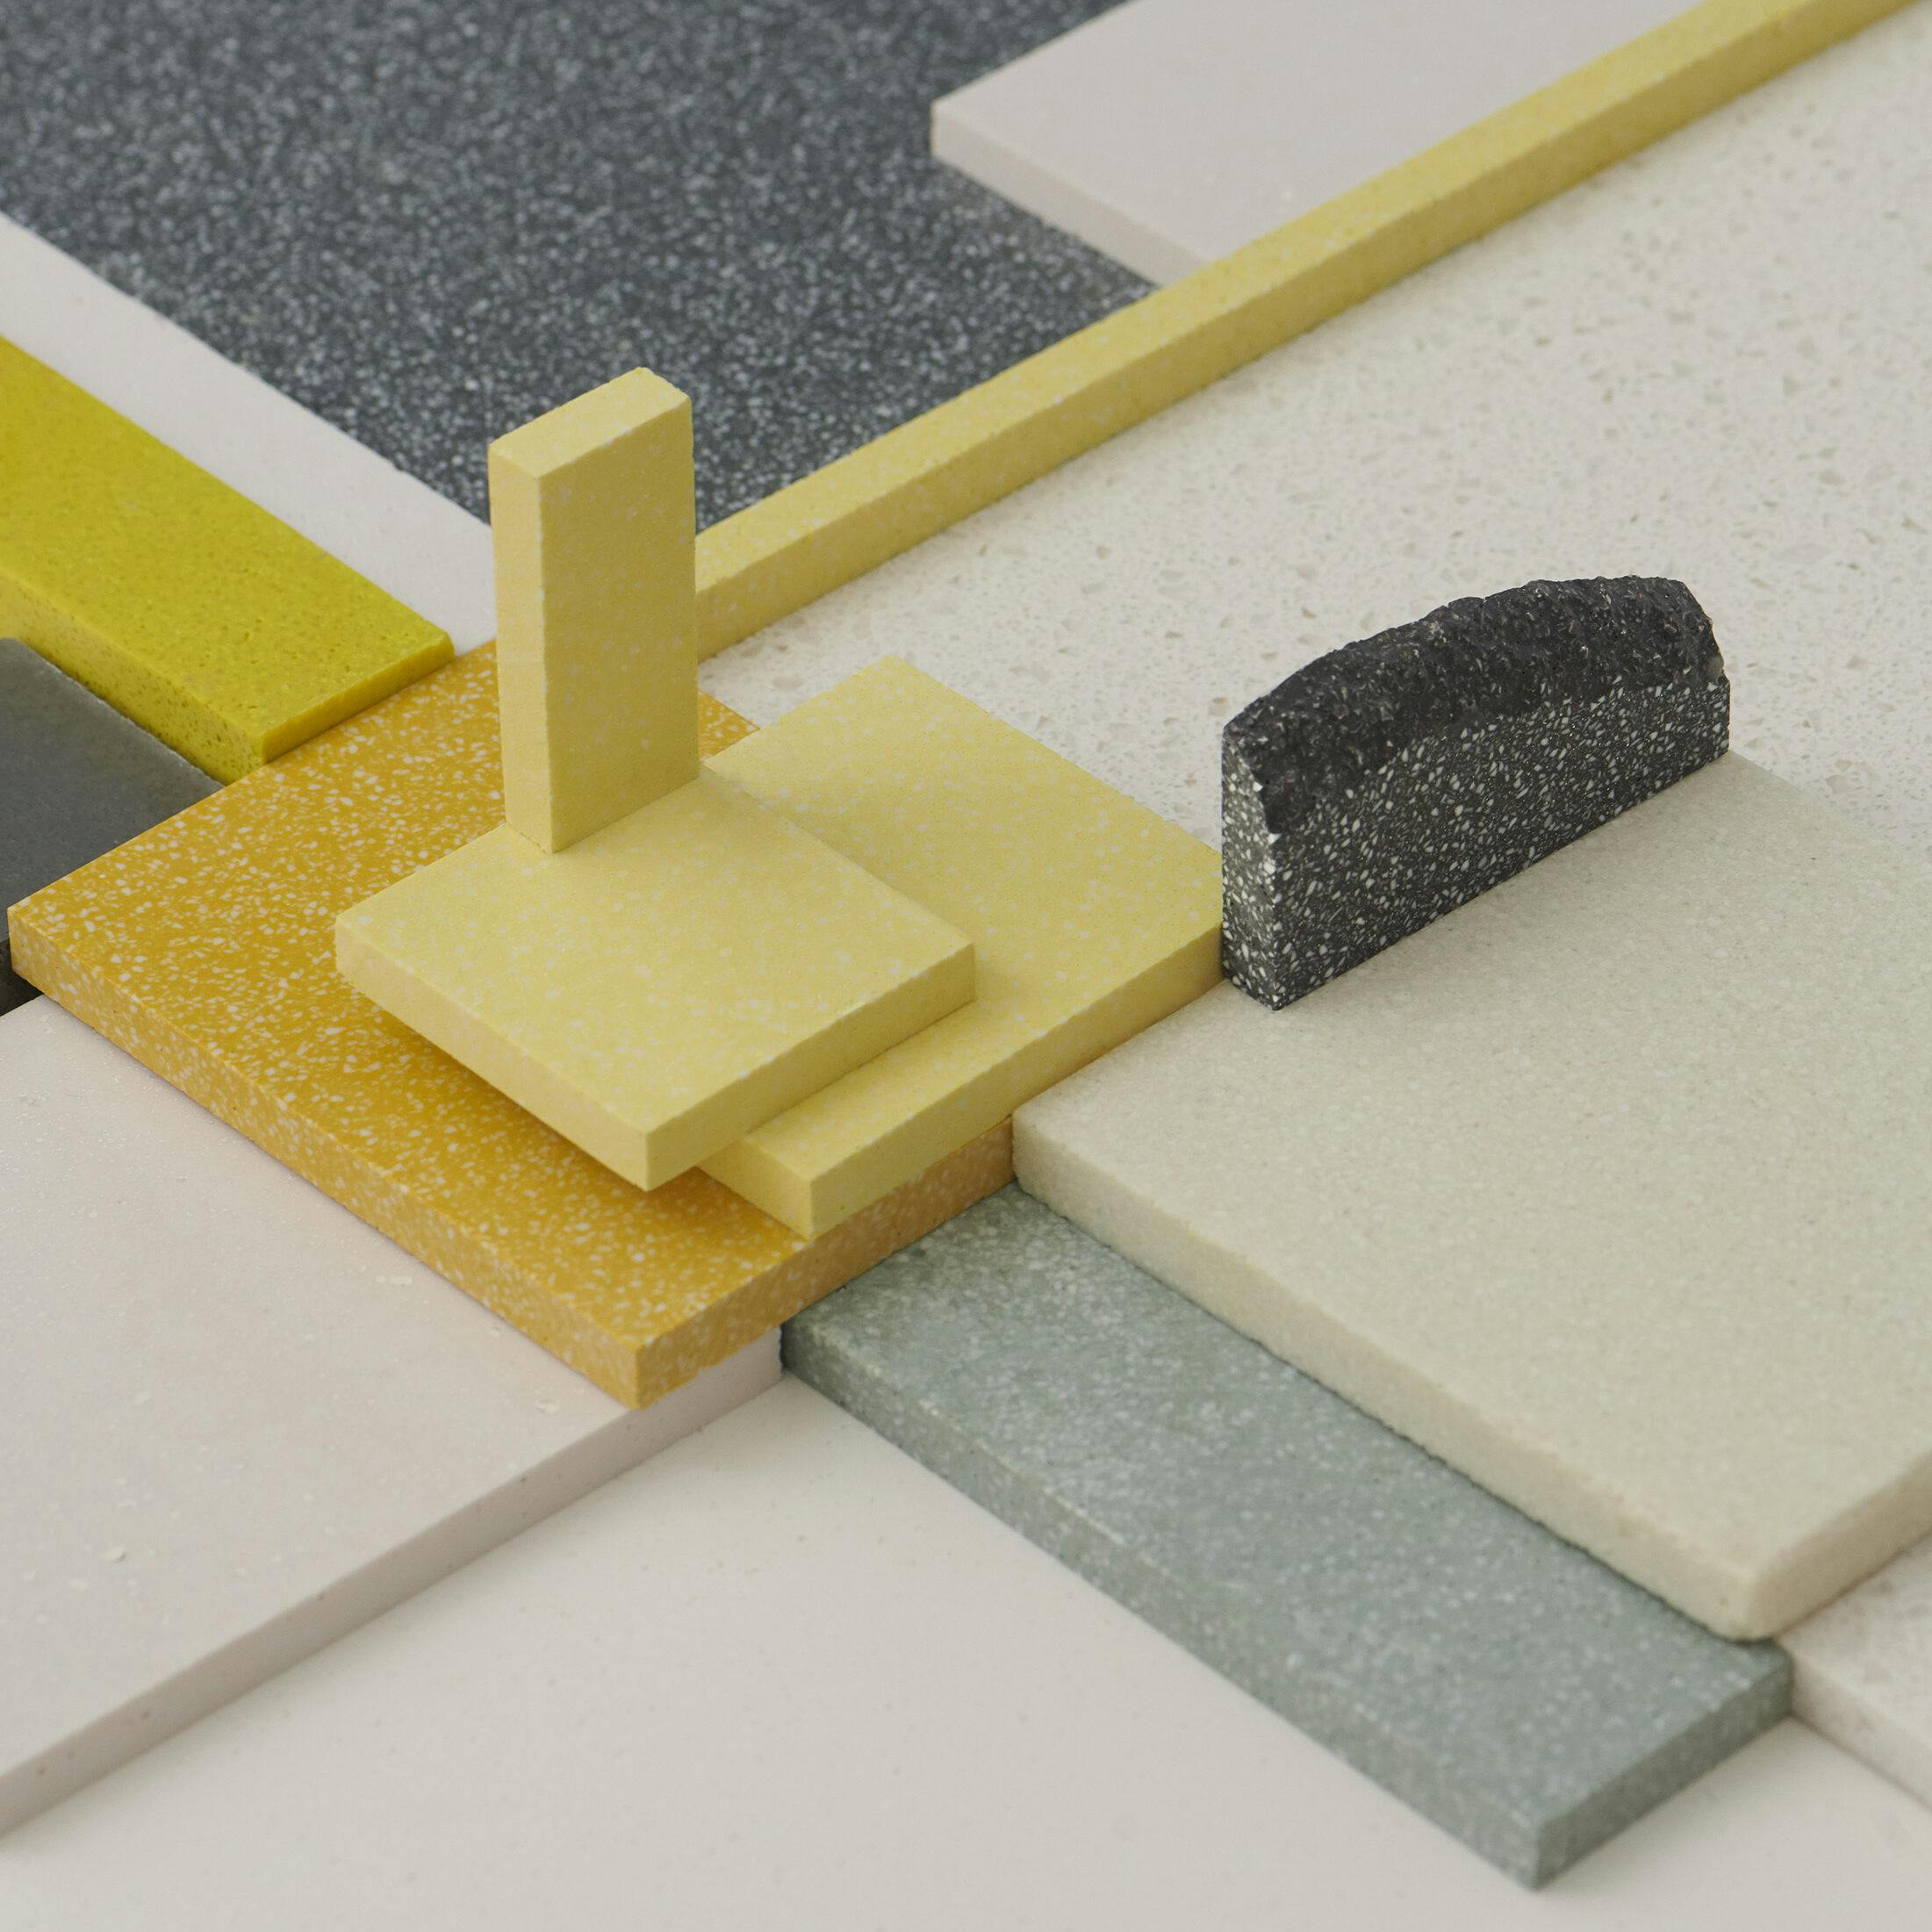 Durat Plus 80% recycled solid surface R&D Samples